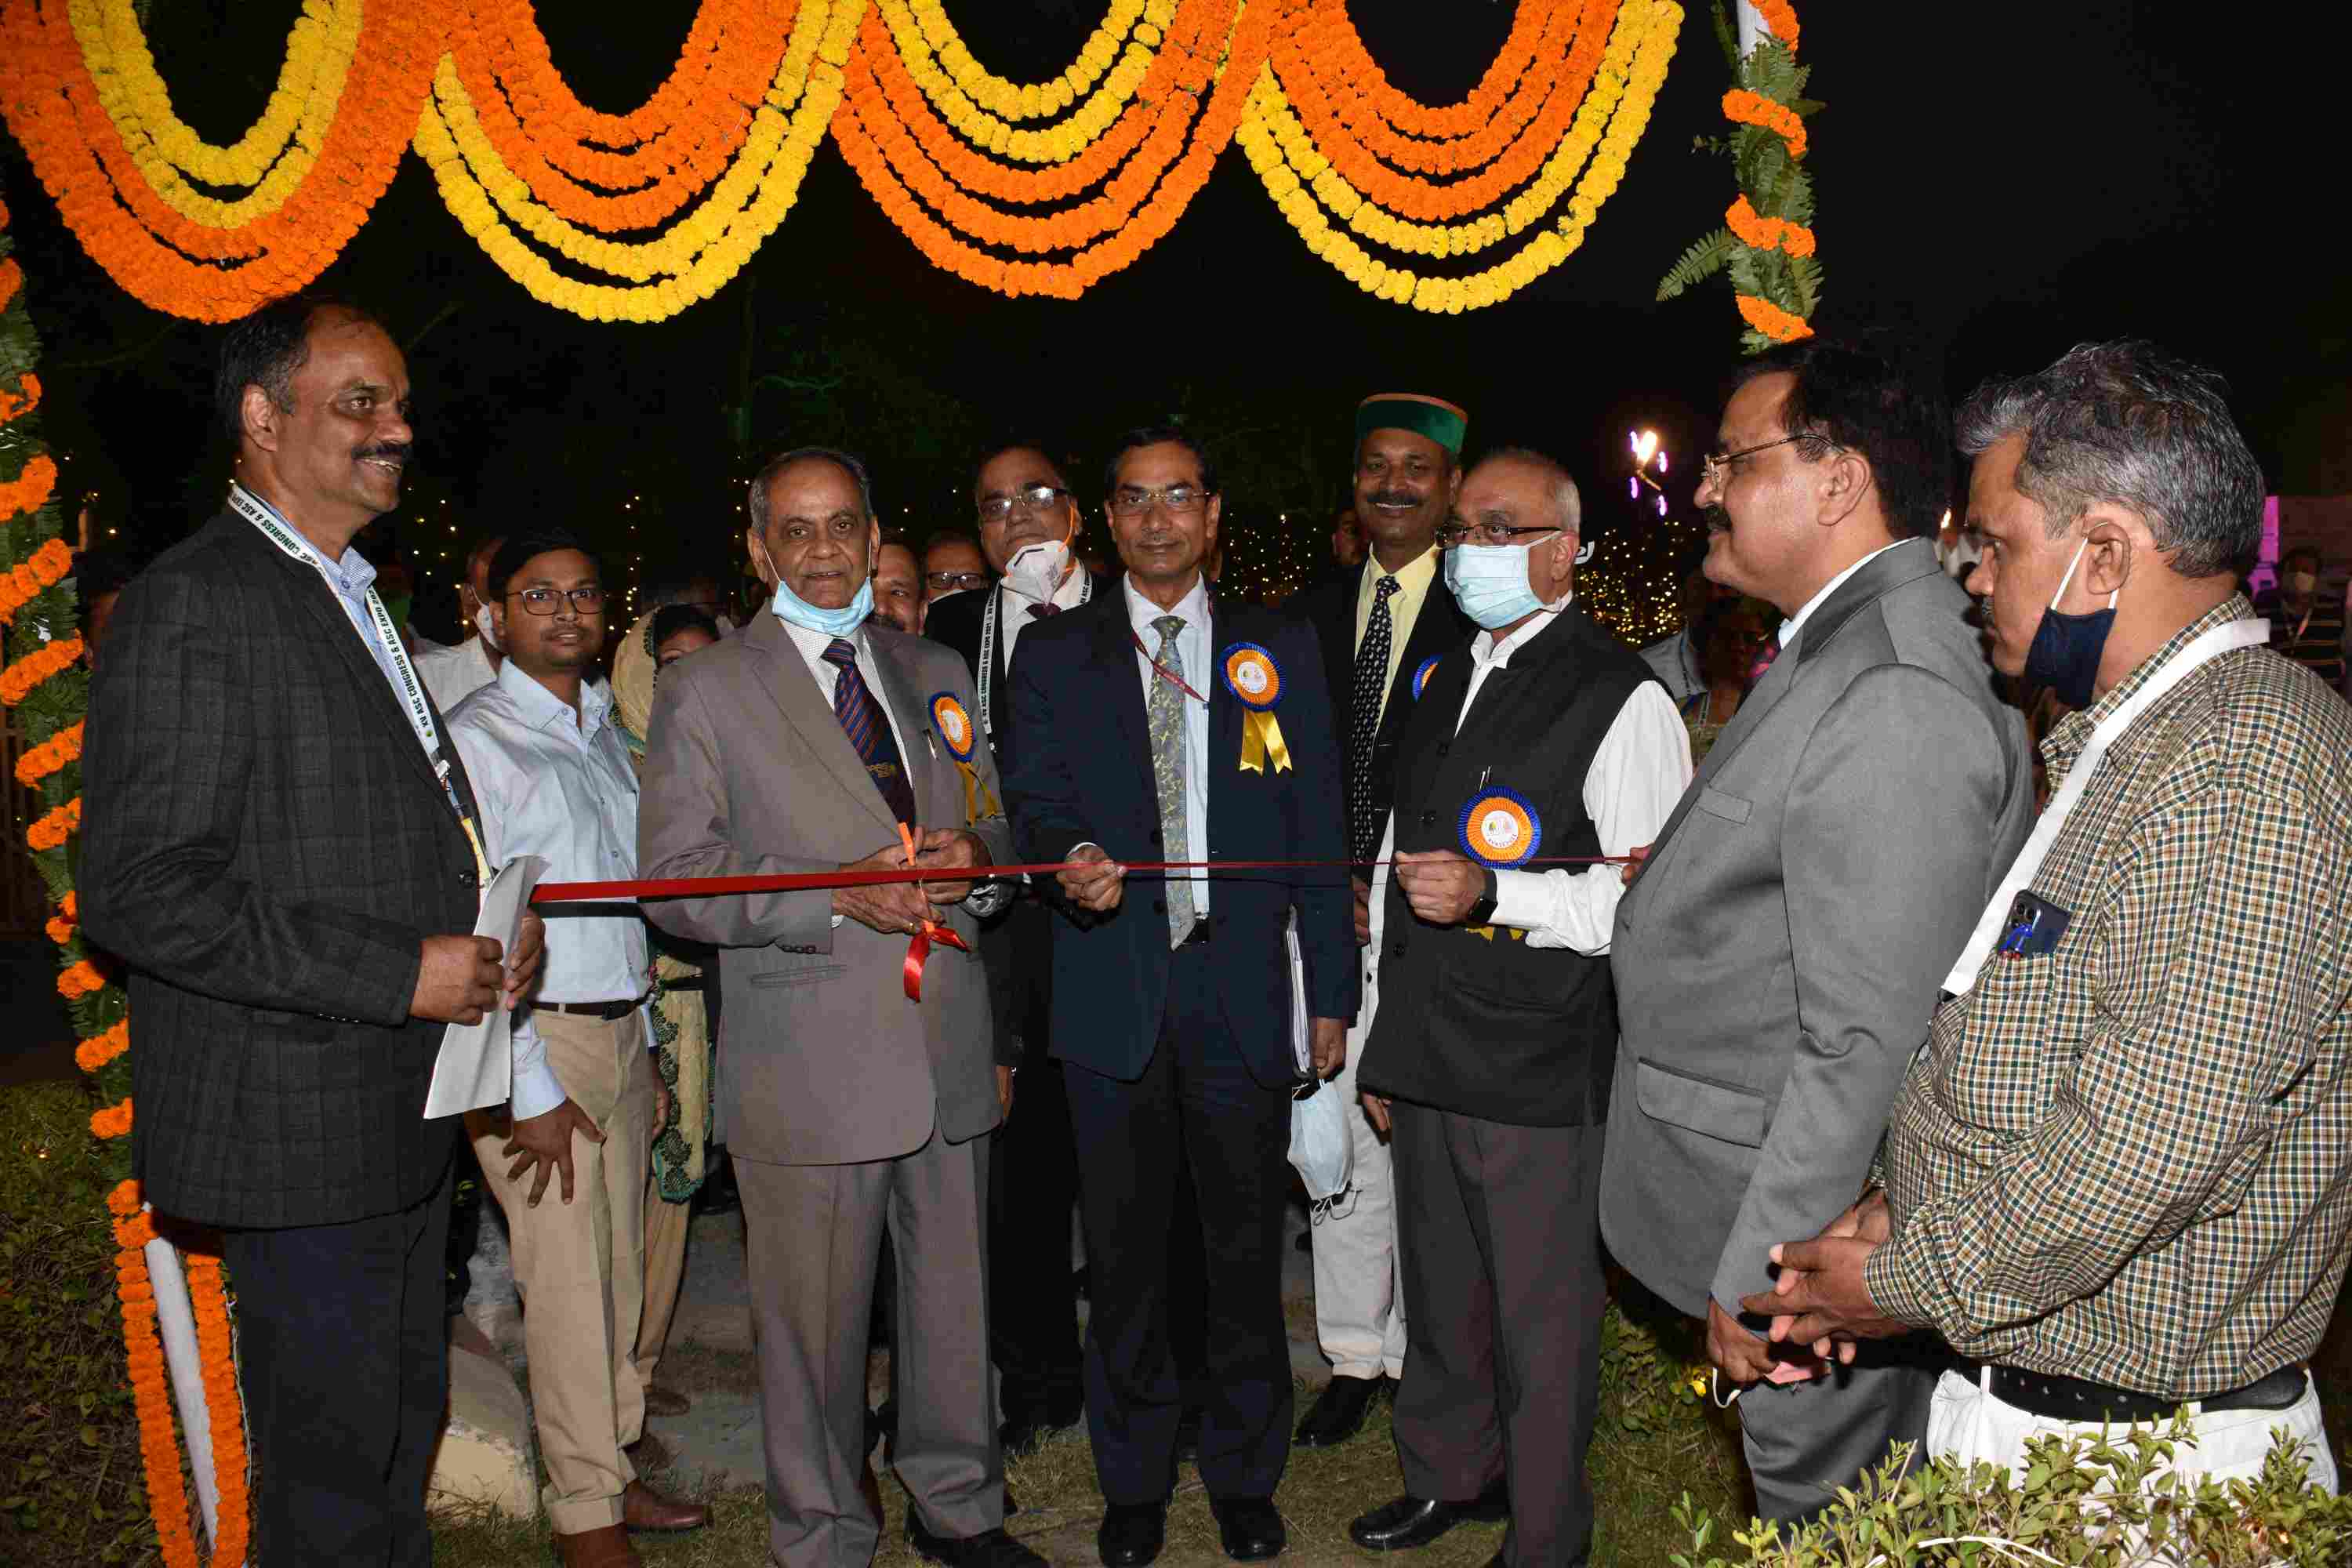 Prof. Panjab Singh along with Dr. T. Mohapatra inaugurating the XV ASC Expo